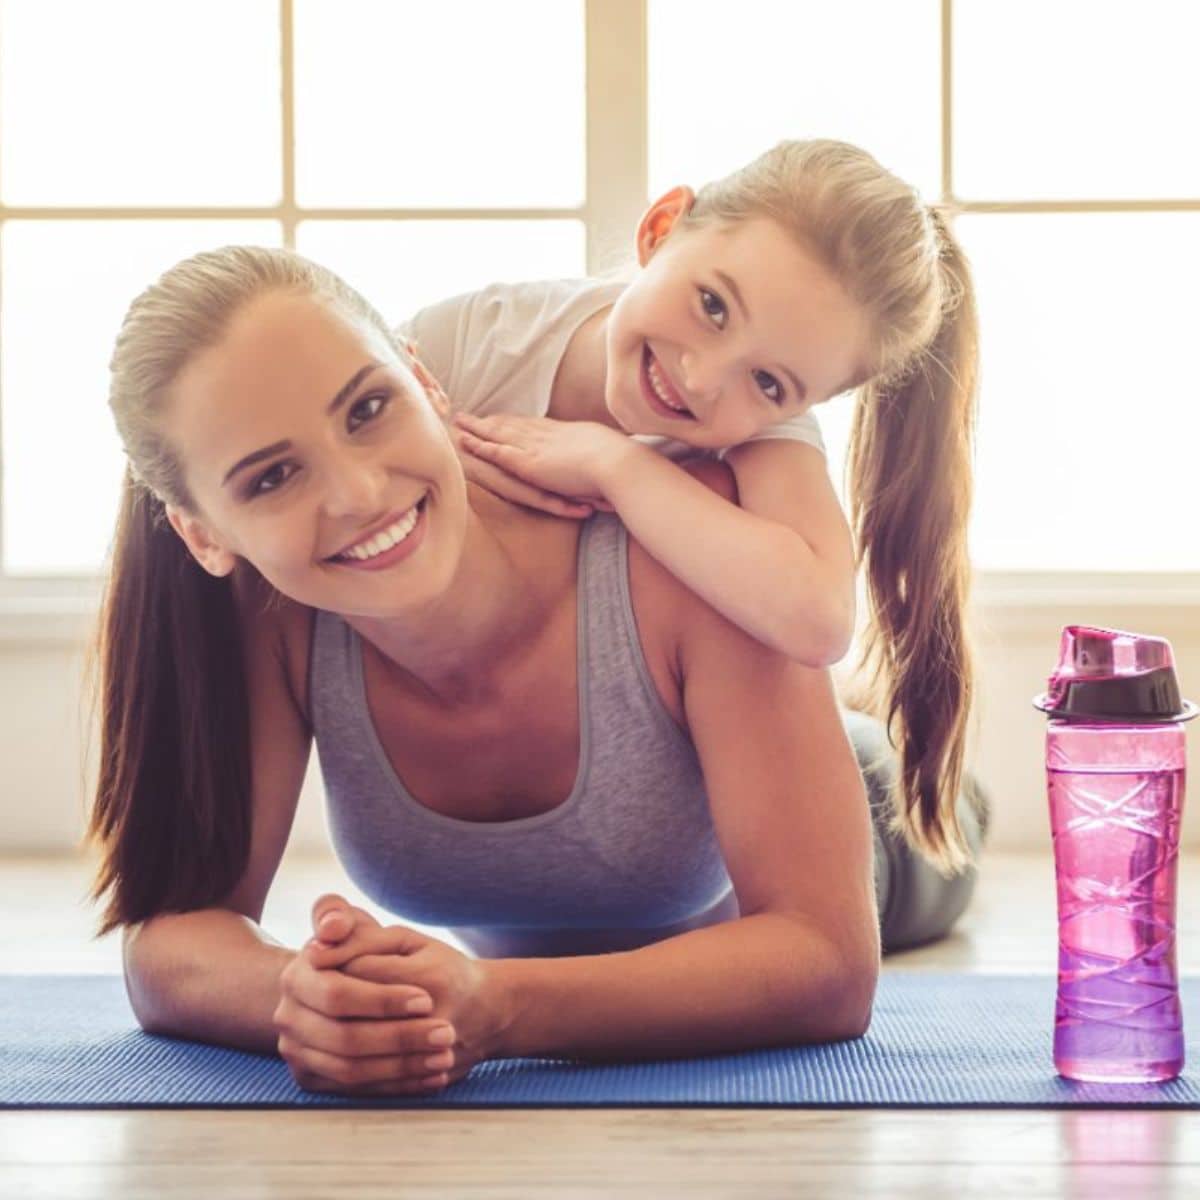 Mother and daughter working out together on a yoga mat.